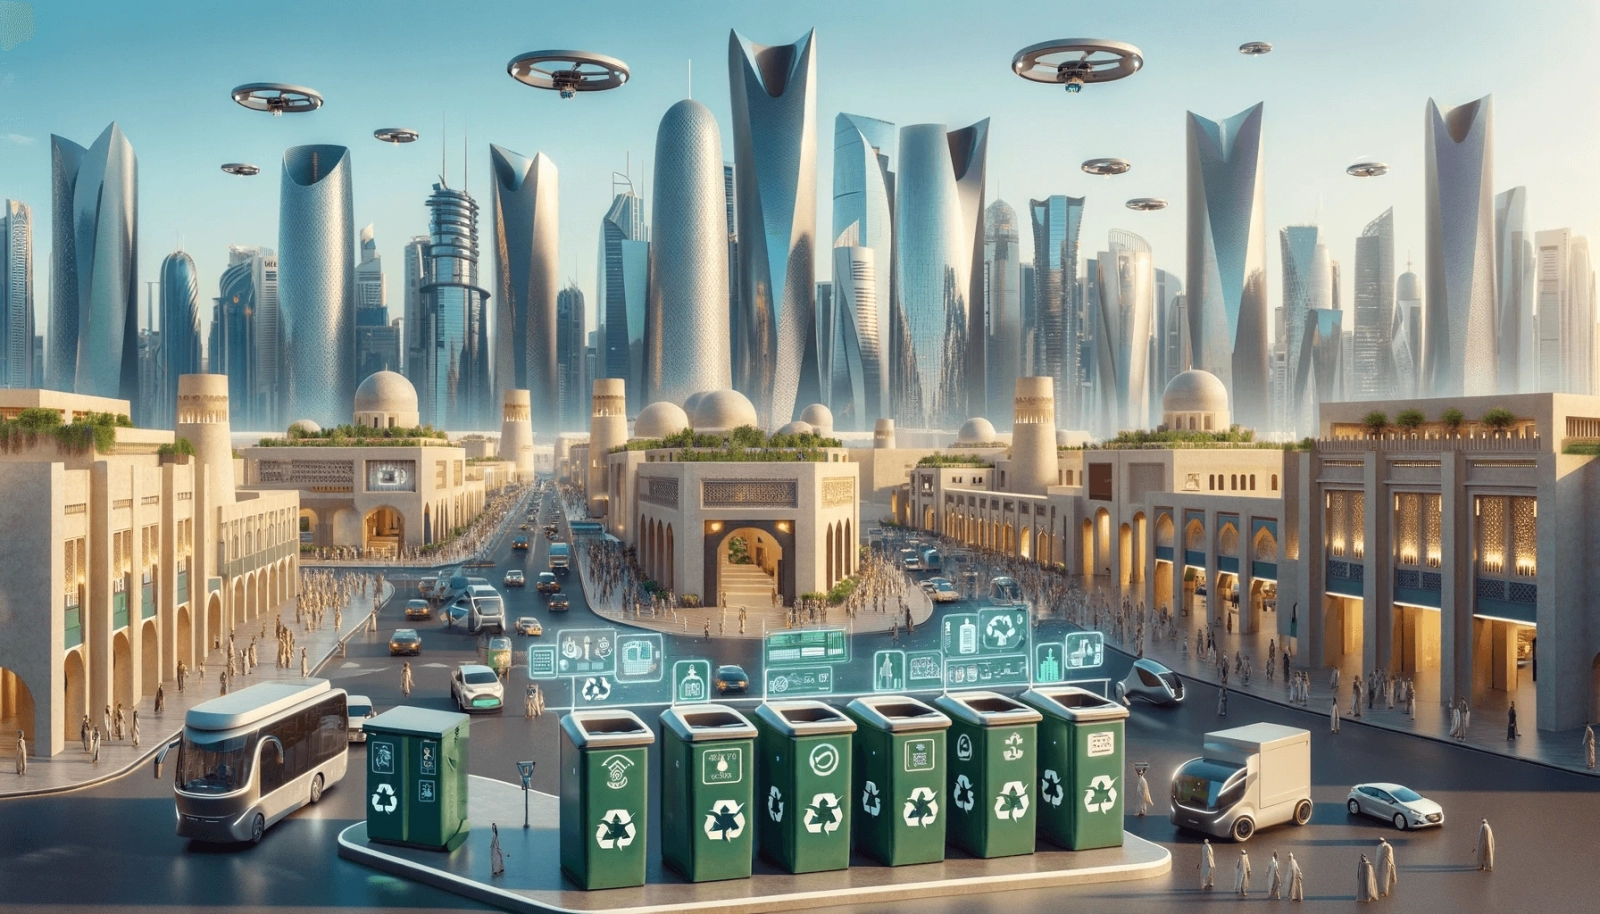 Waste management in cities: